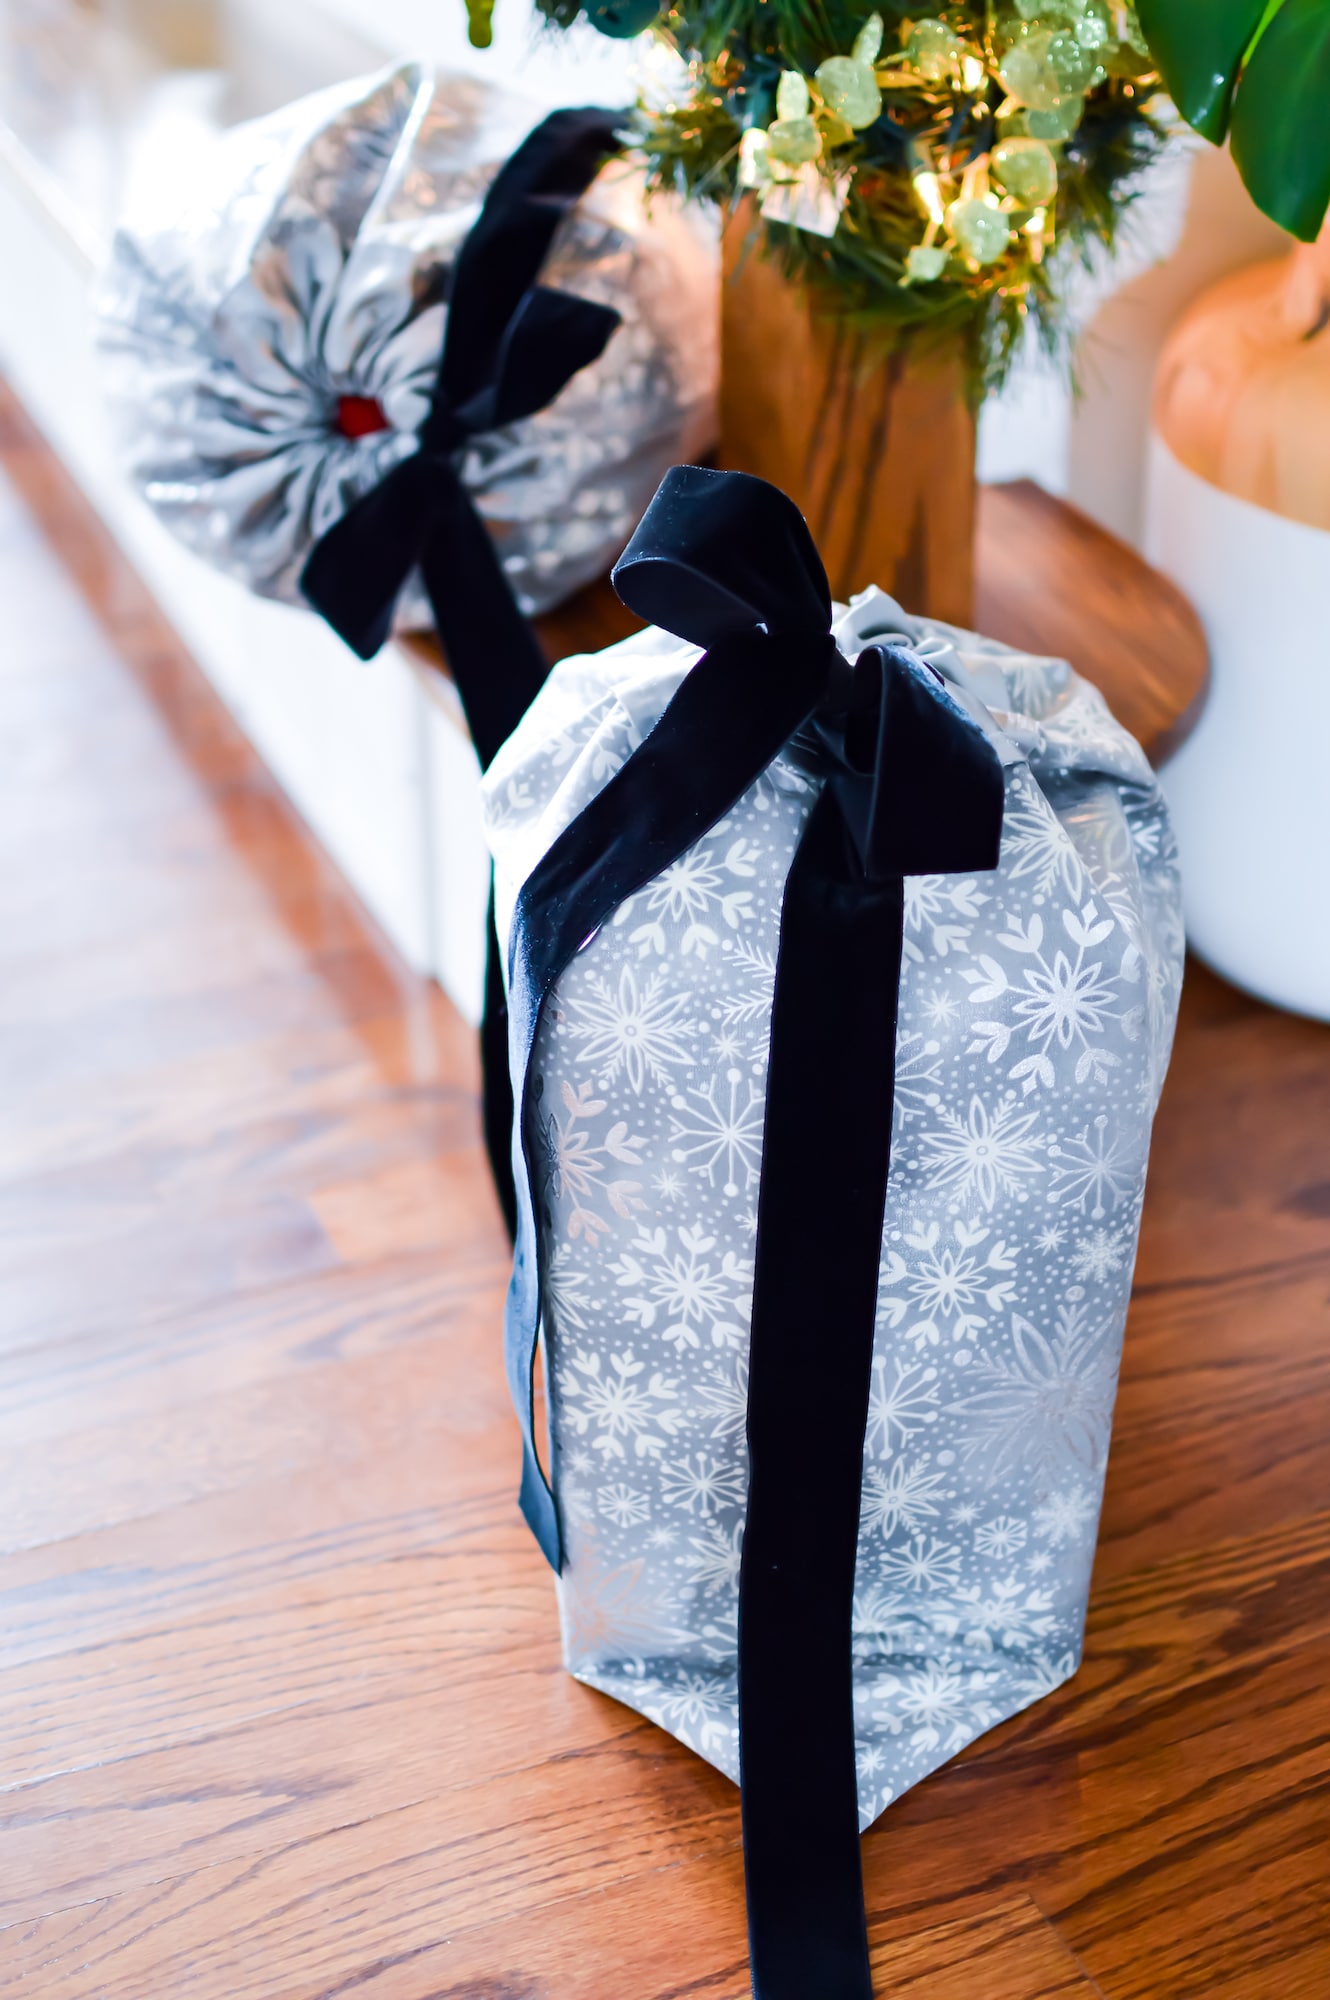 Two gift bags on a wooden floor next to a christmas tree.